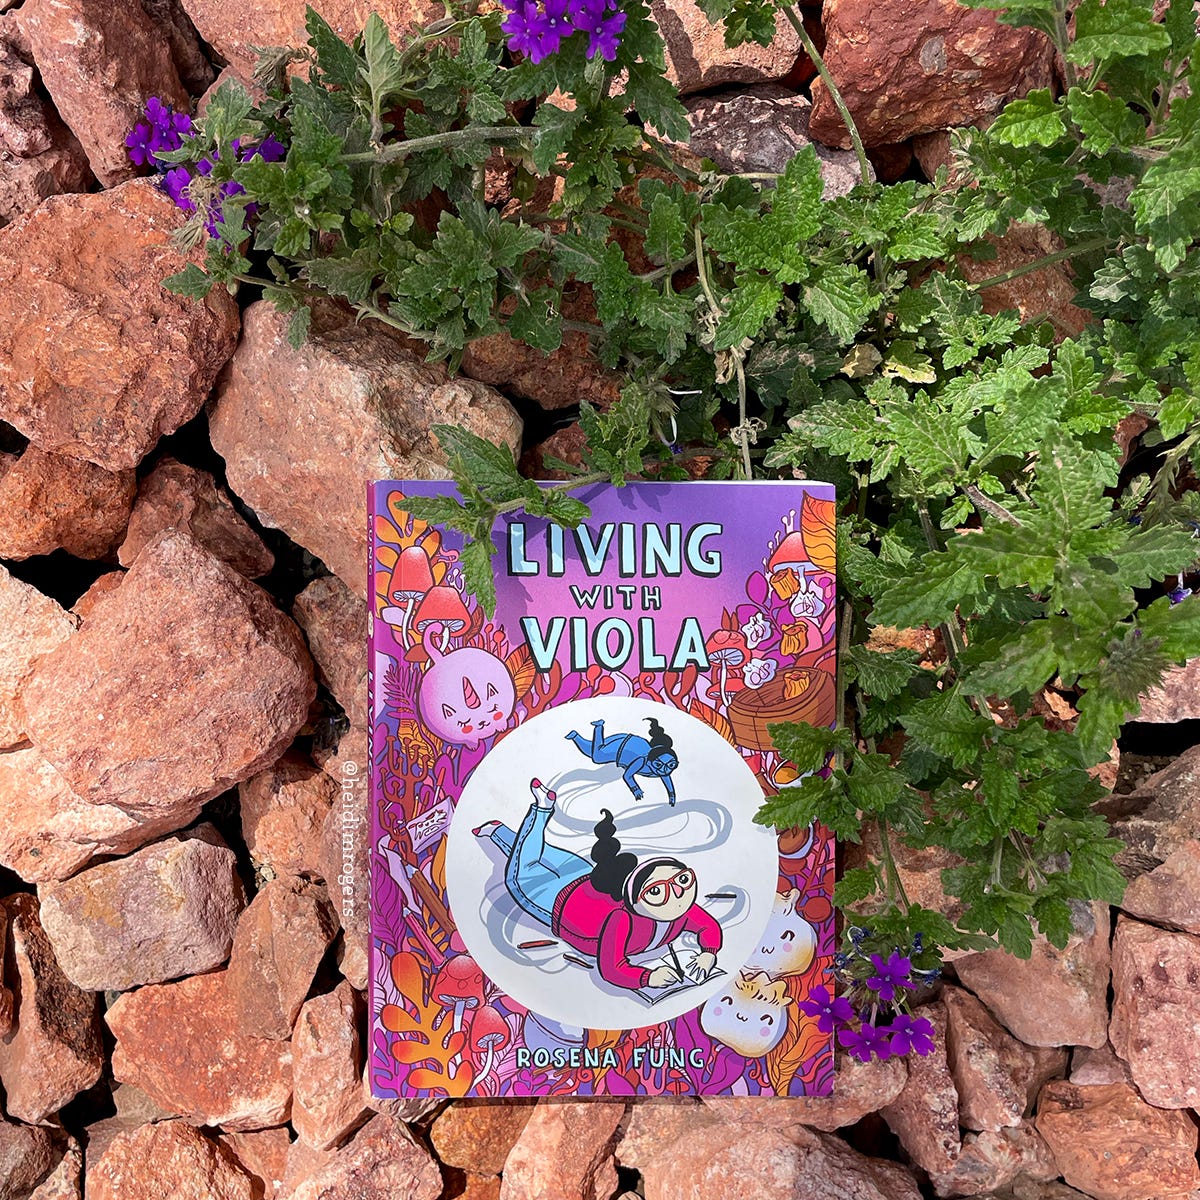 Cover of Living With Viola by Rosena Fung on orange rocks with purple flowers